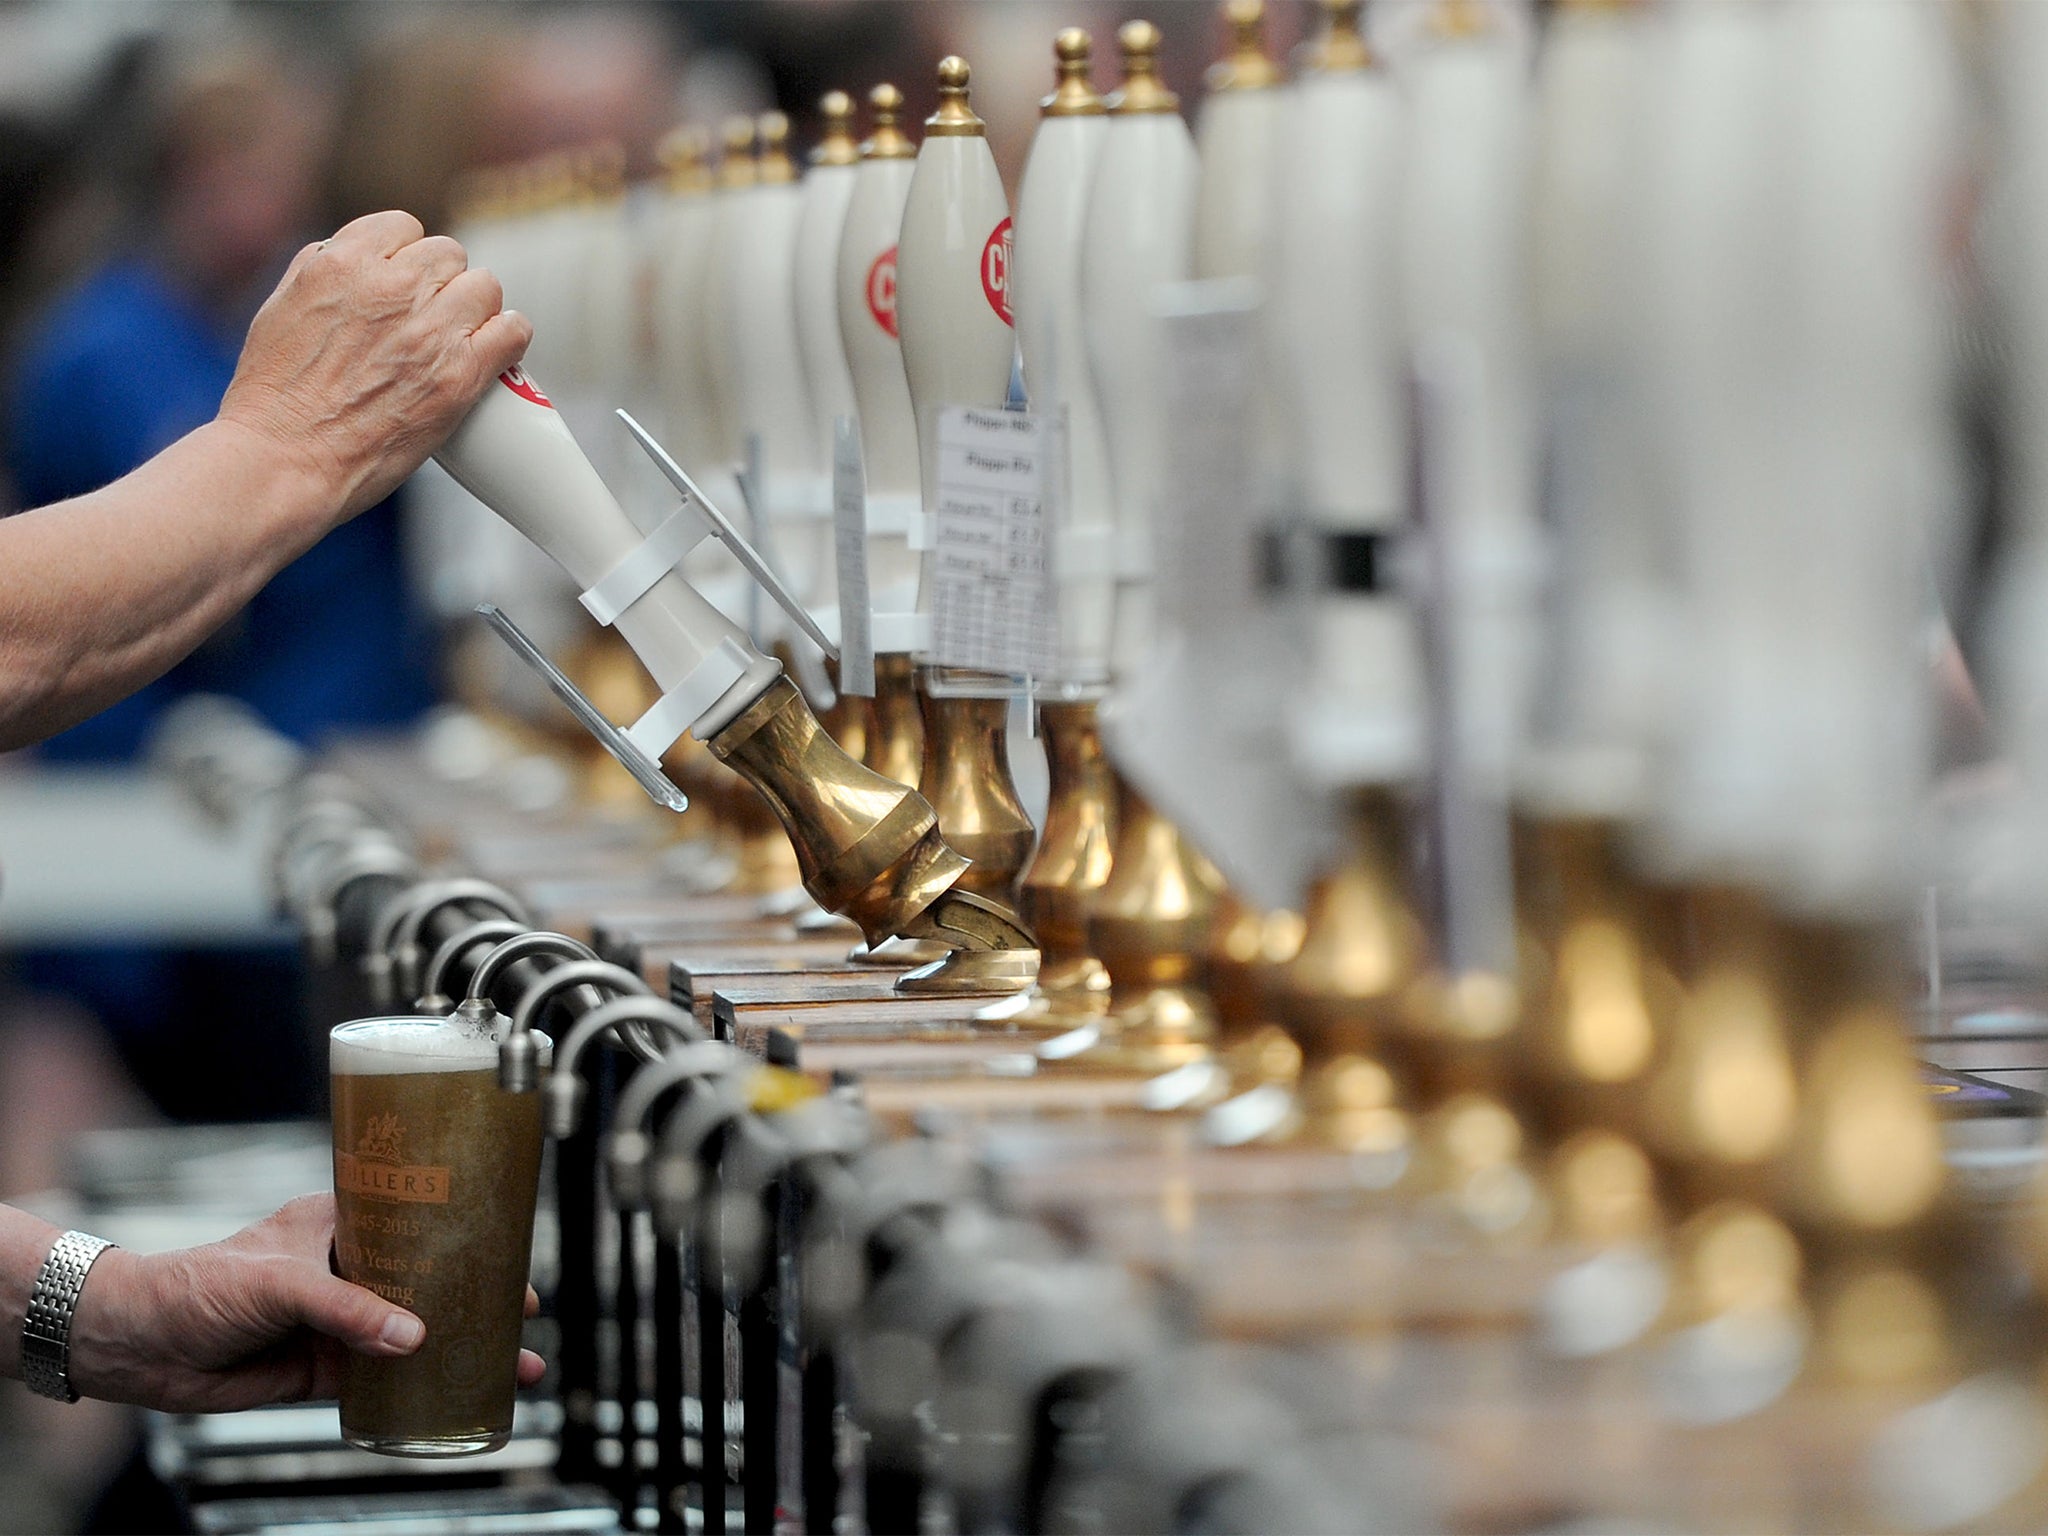 Camra: UK's biggest organiser of beer festivals refuses to stock ales from  breweries that don't provide full list of ingredients, The Independent